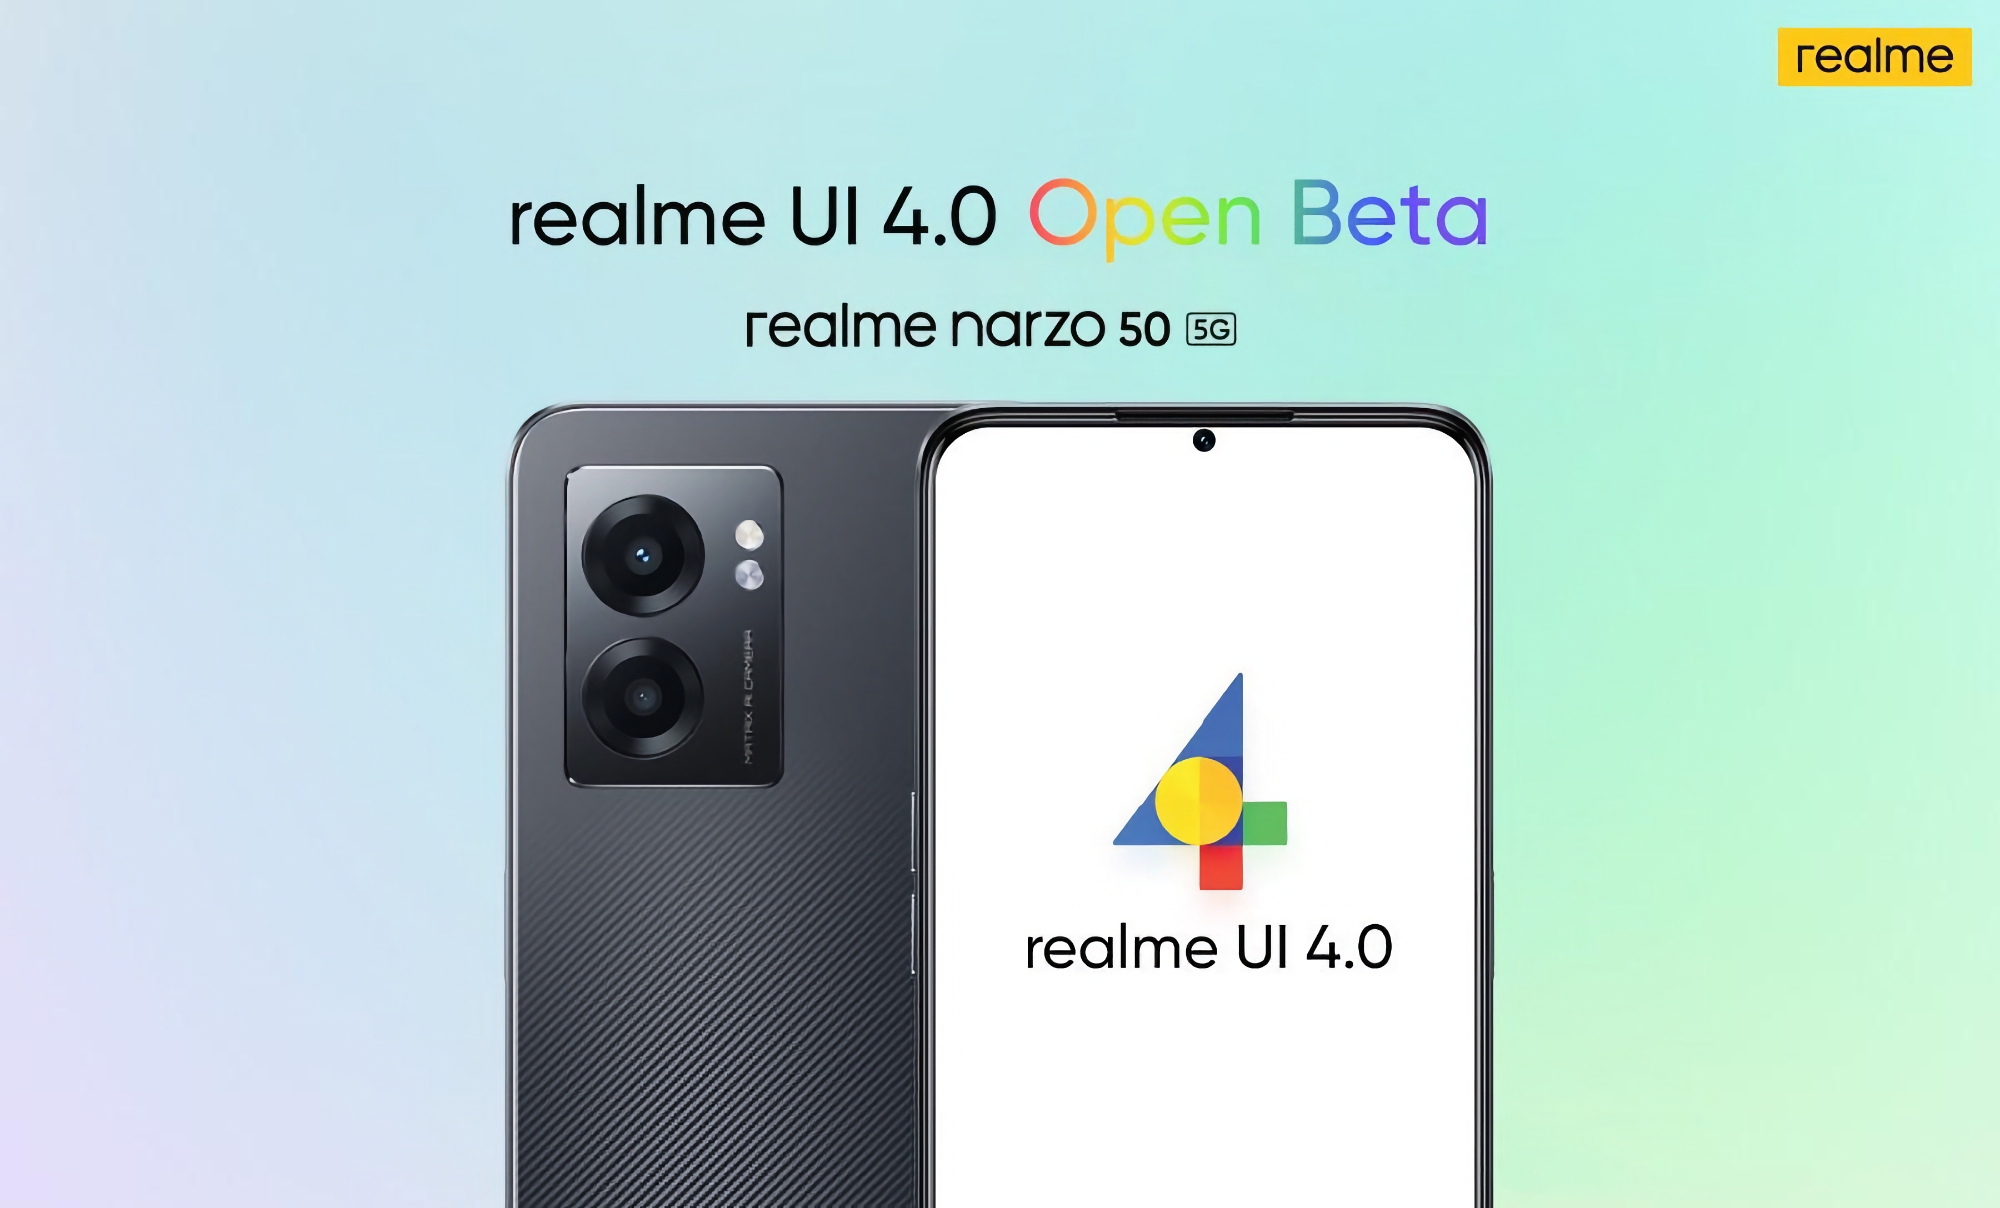 realme launches Android 13 and realme UI 4.0 testing on realme Narzo 50 5G smartphone